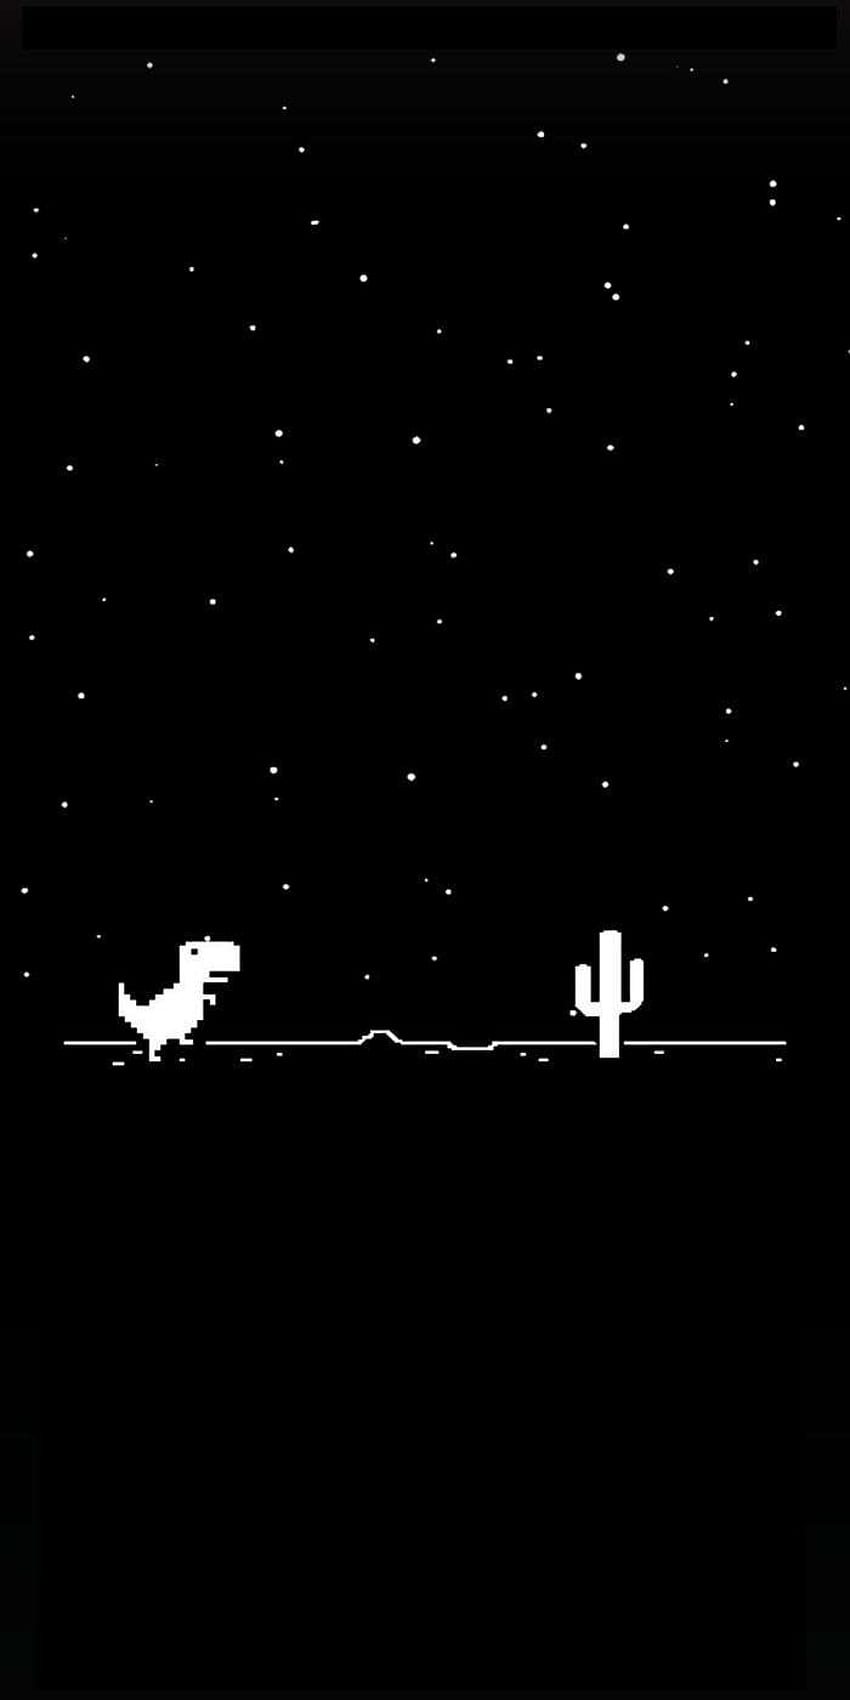 How to play an Olympic-themed version of the Google Chrome dinosaur game